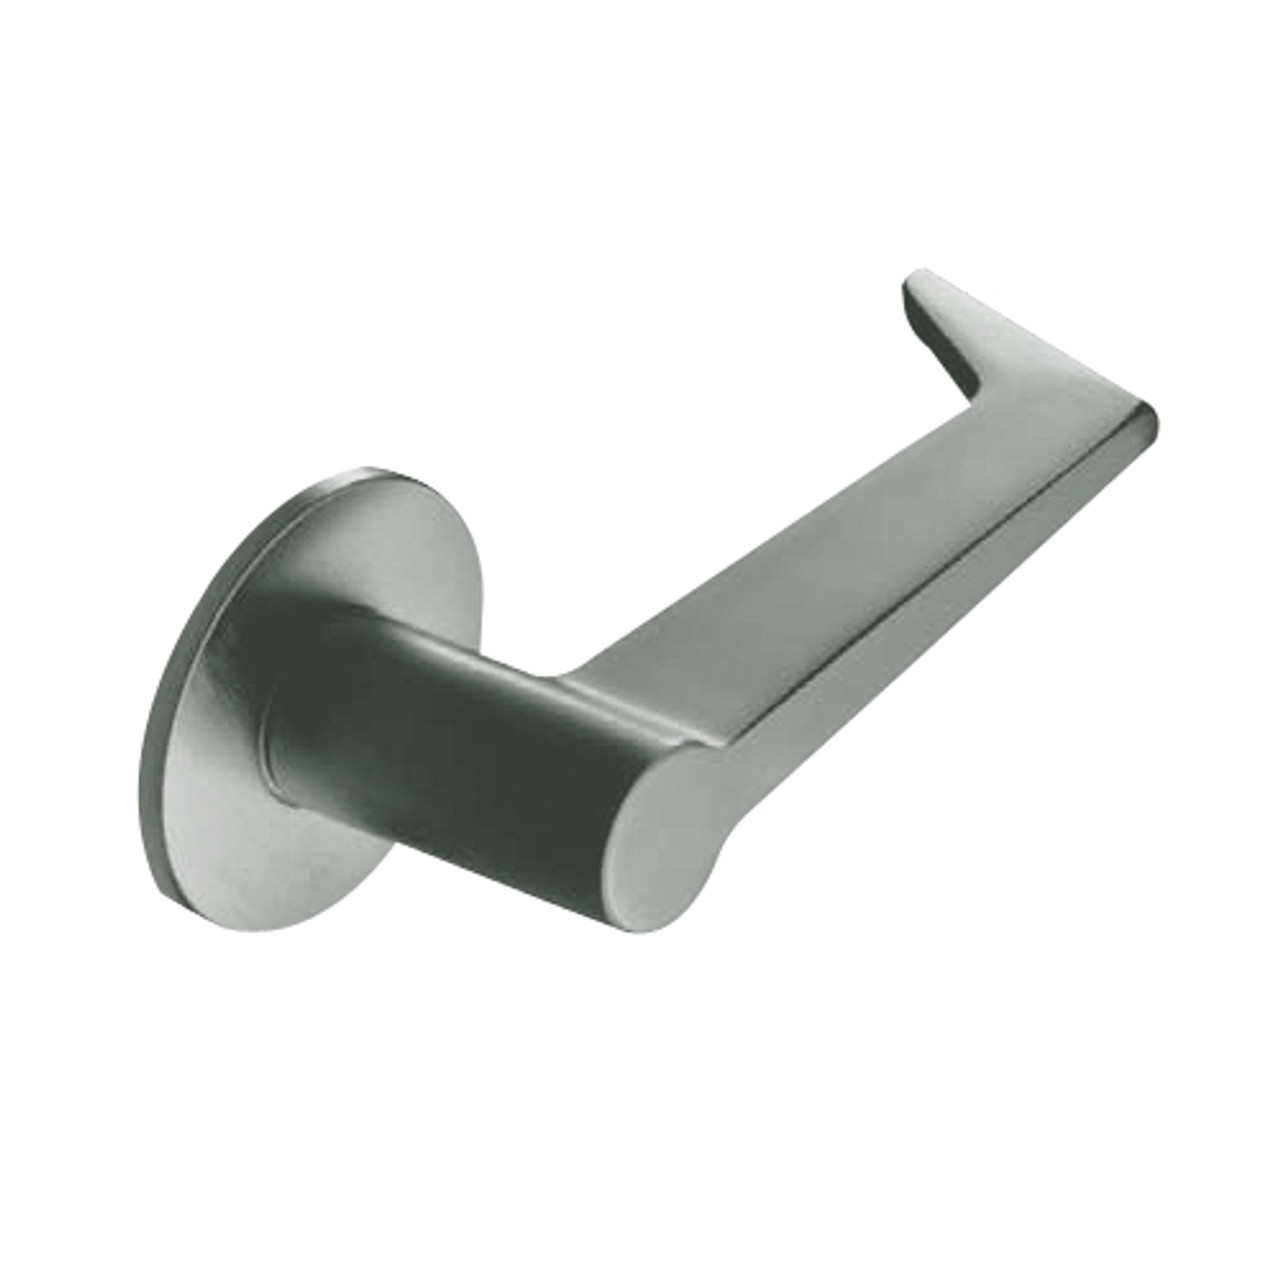 ML2057-ESB-619-CL7 Corbin Russwin ML2000 Series IC 7-Pin Less Core Mortise Storeroom Locksets with Essex Lever in Satin Nickel